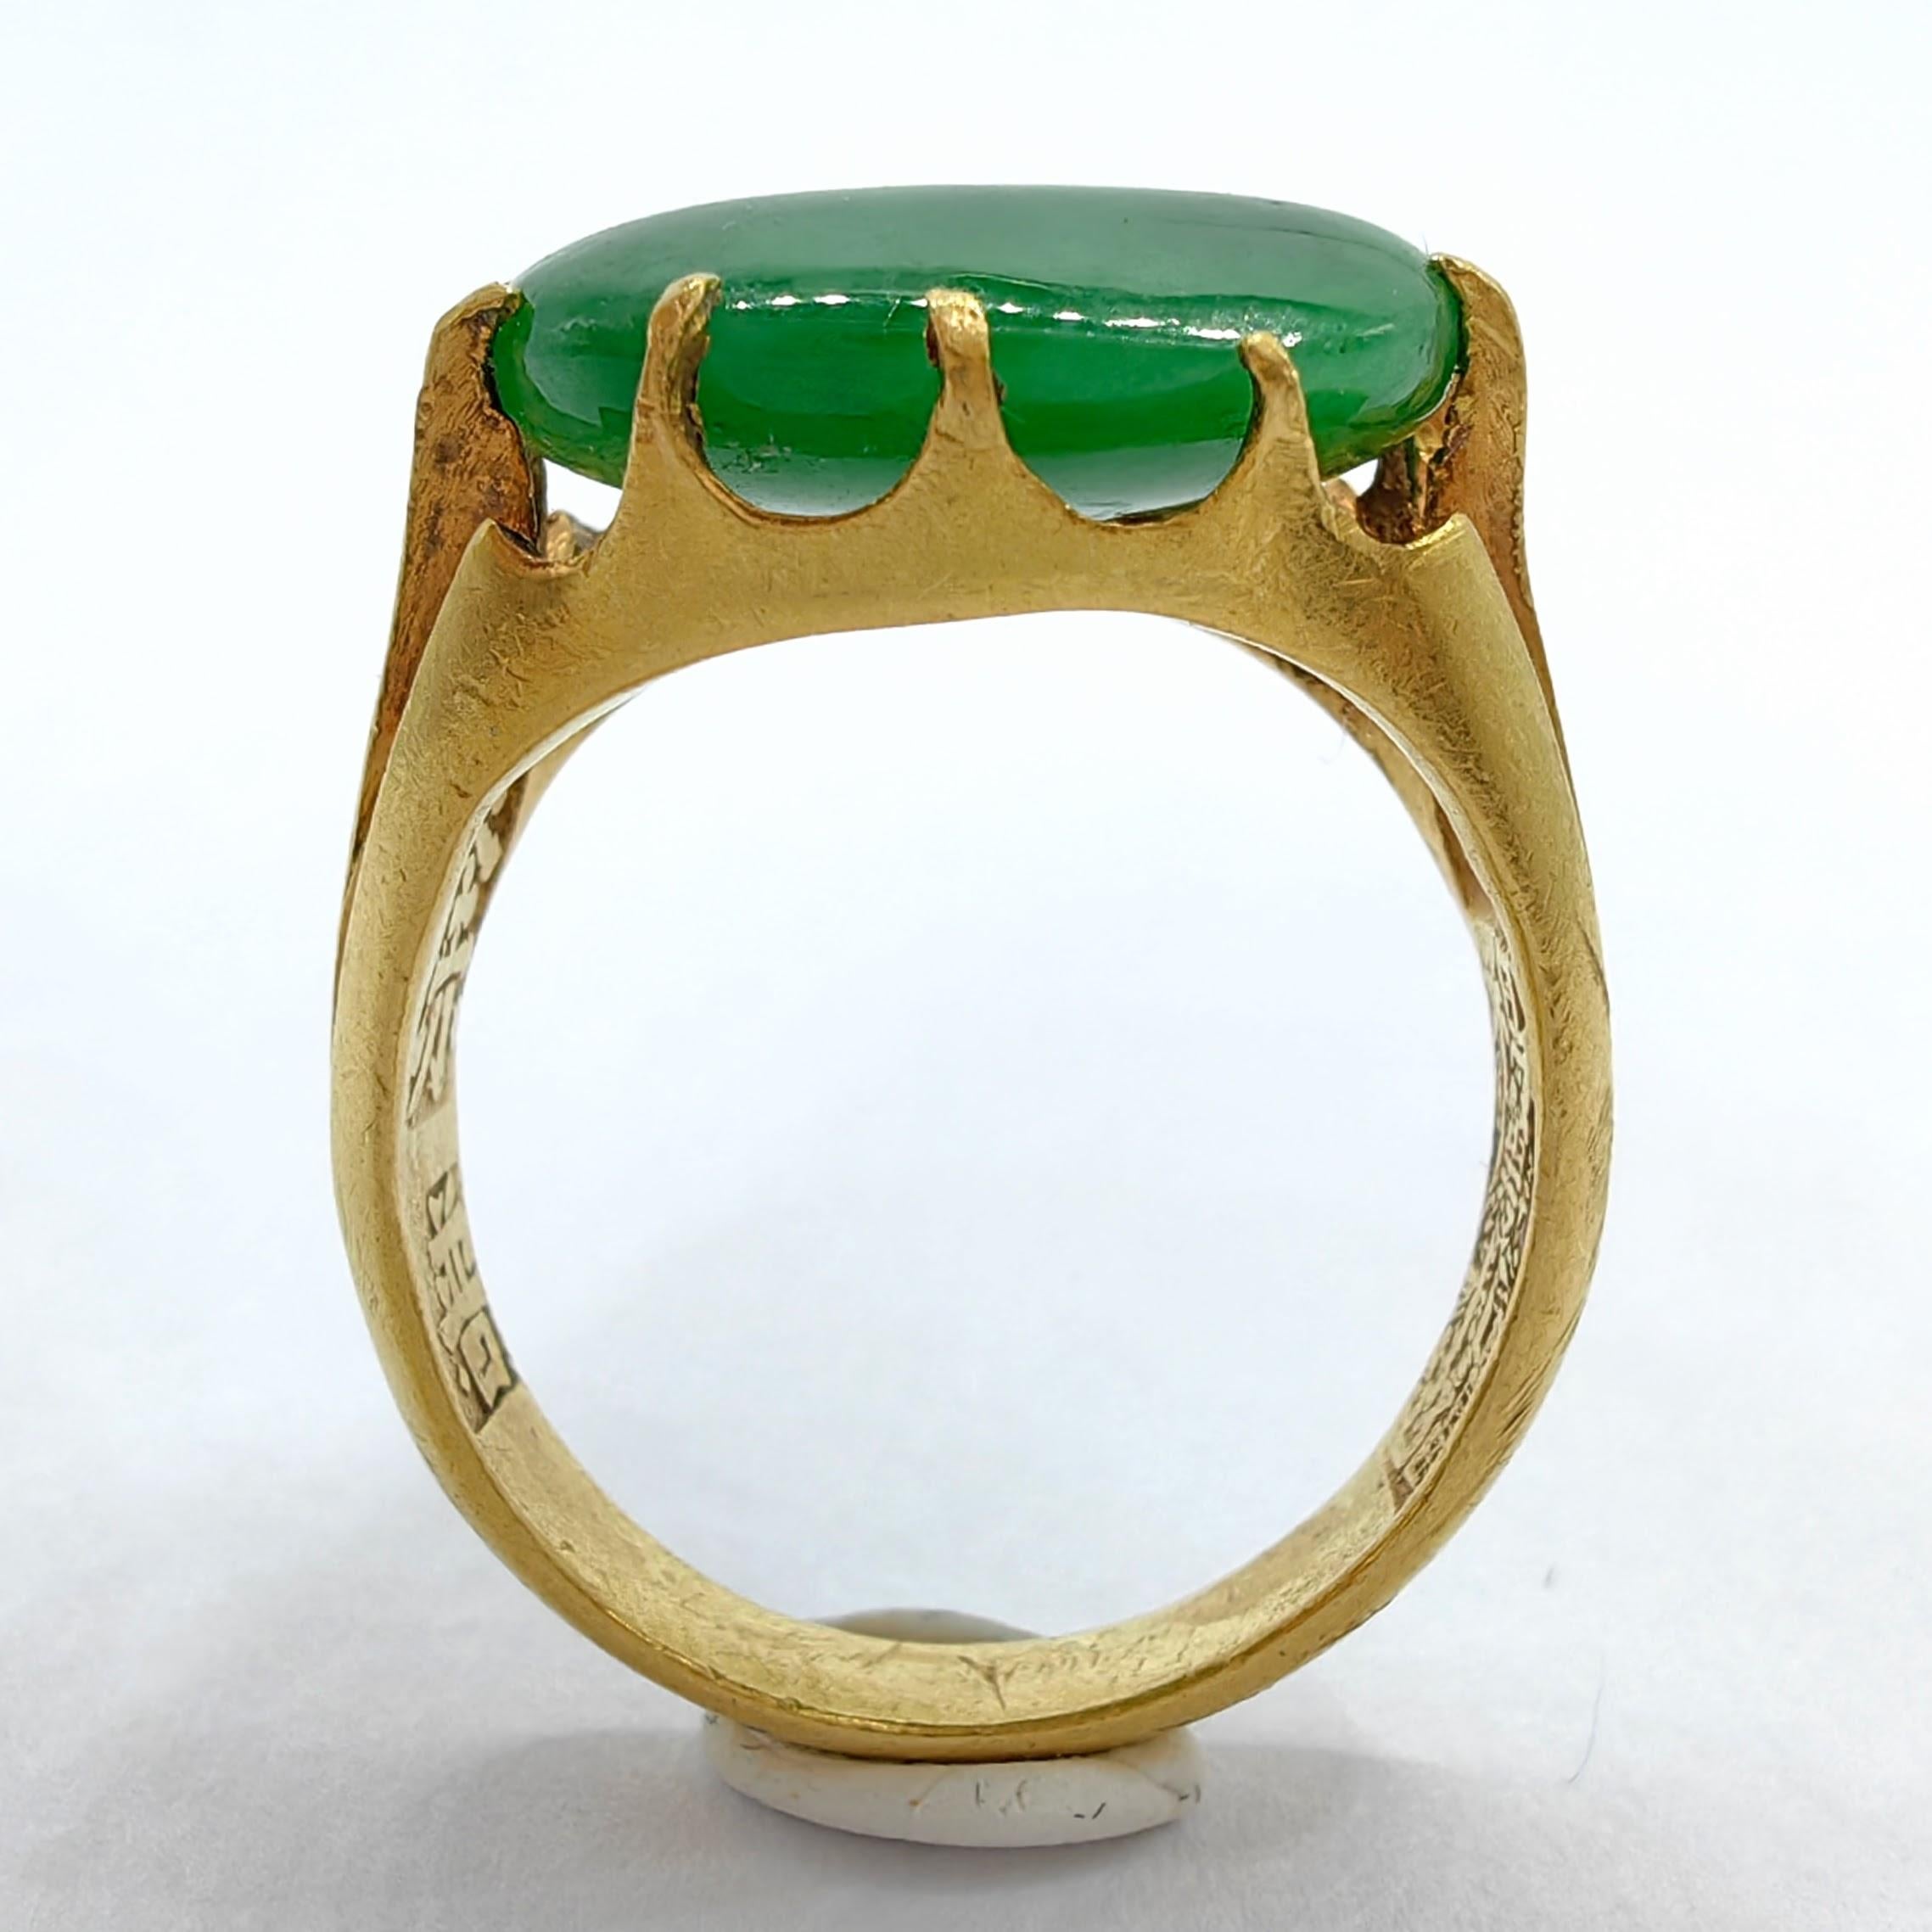 Artist Antique Imperial Green Cabochon Jadeite Jade 24K Yellow Gold Pinky Finger Ring For Sale